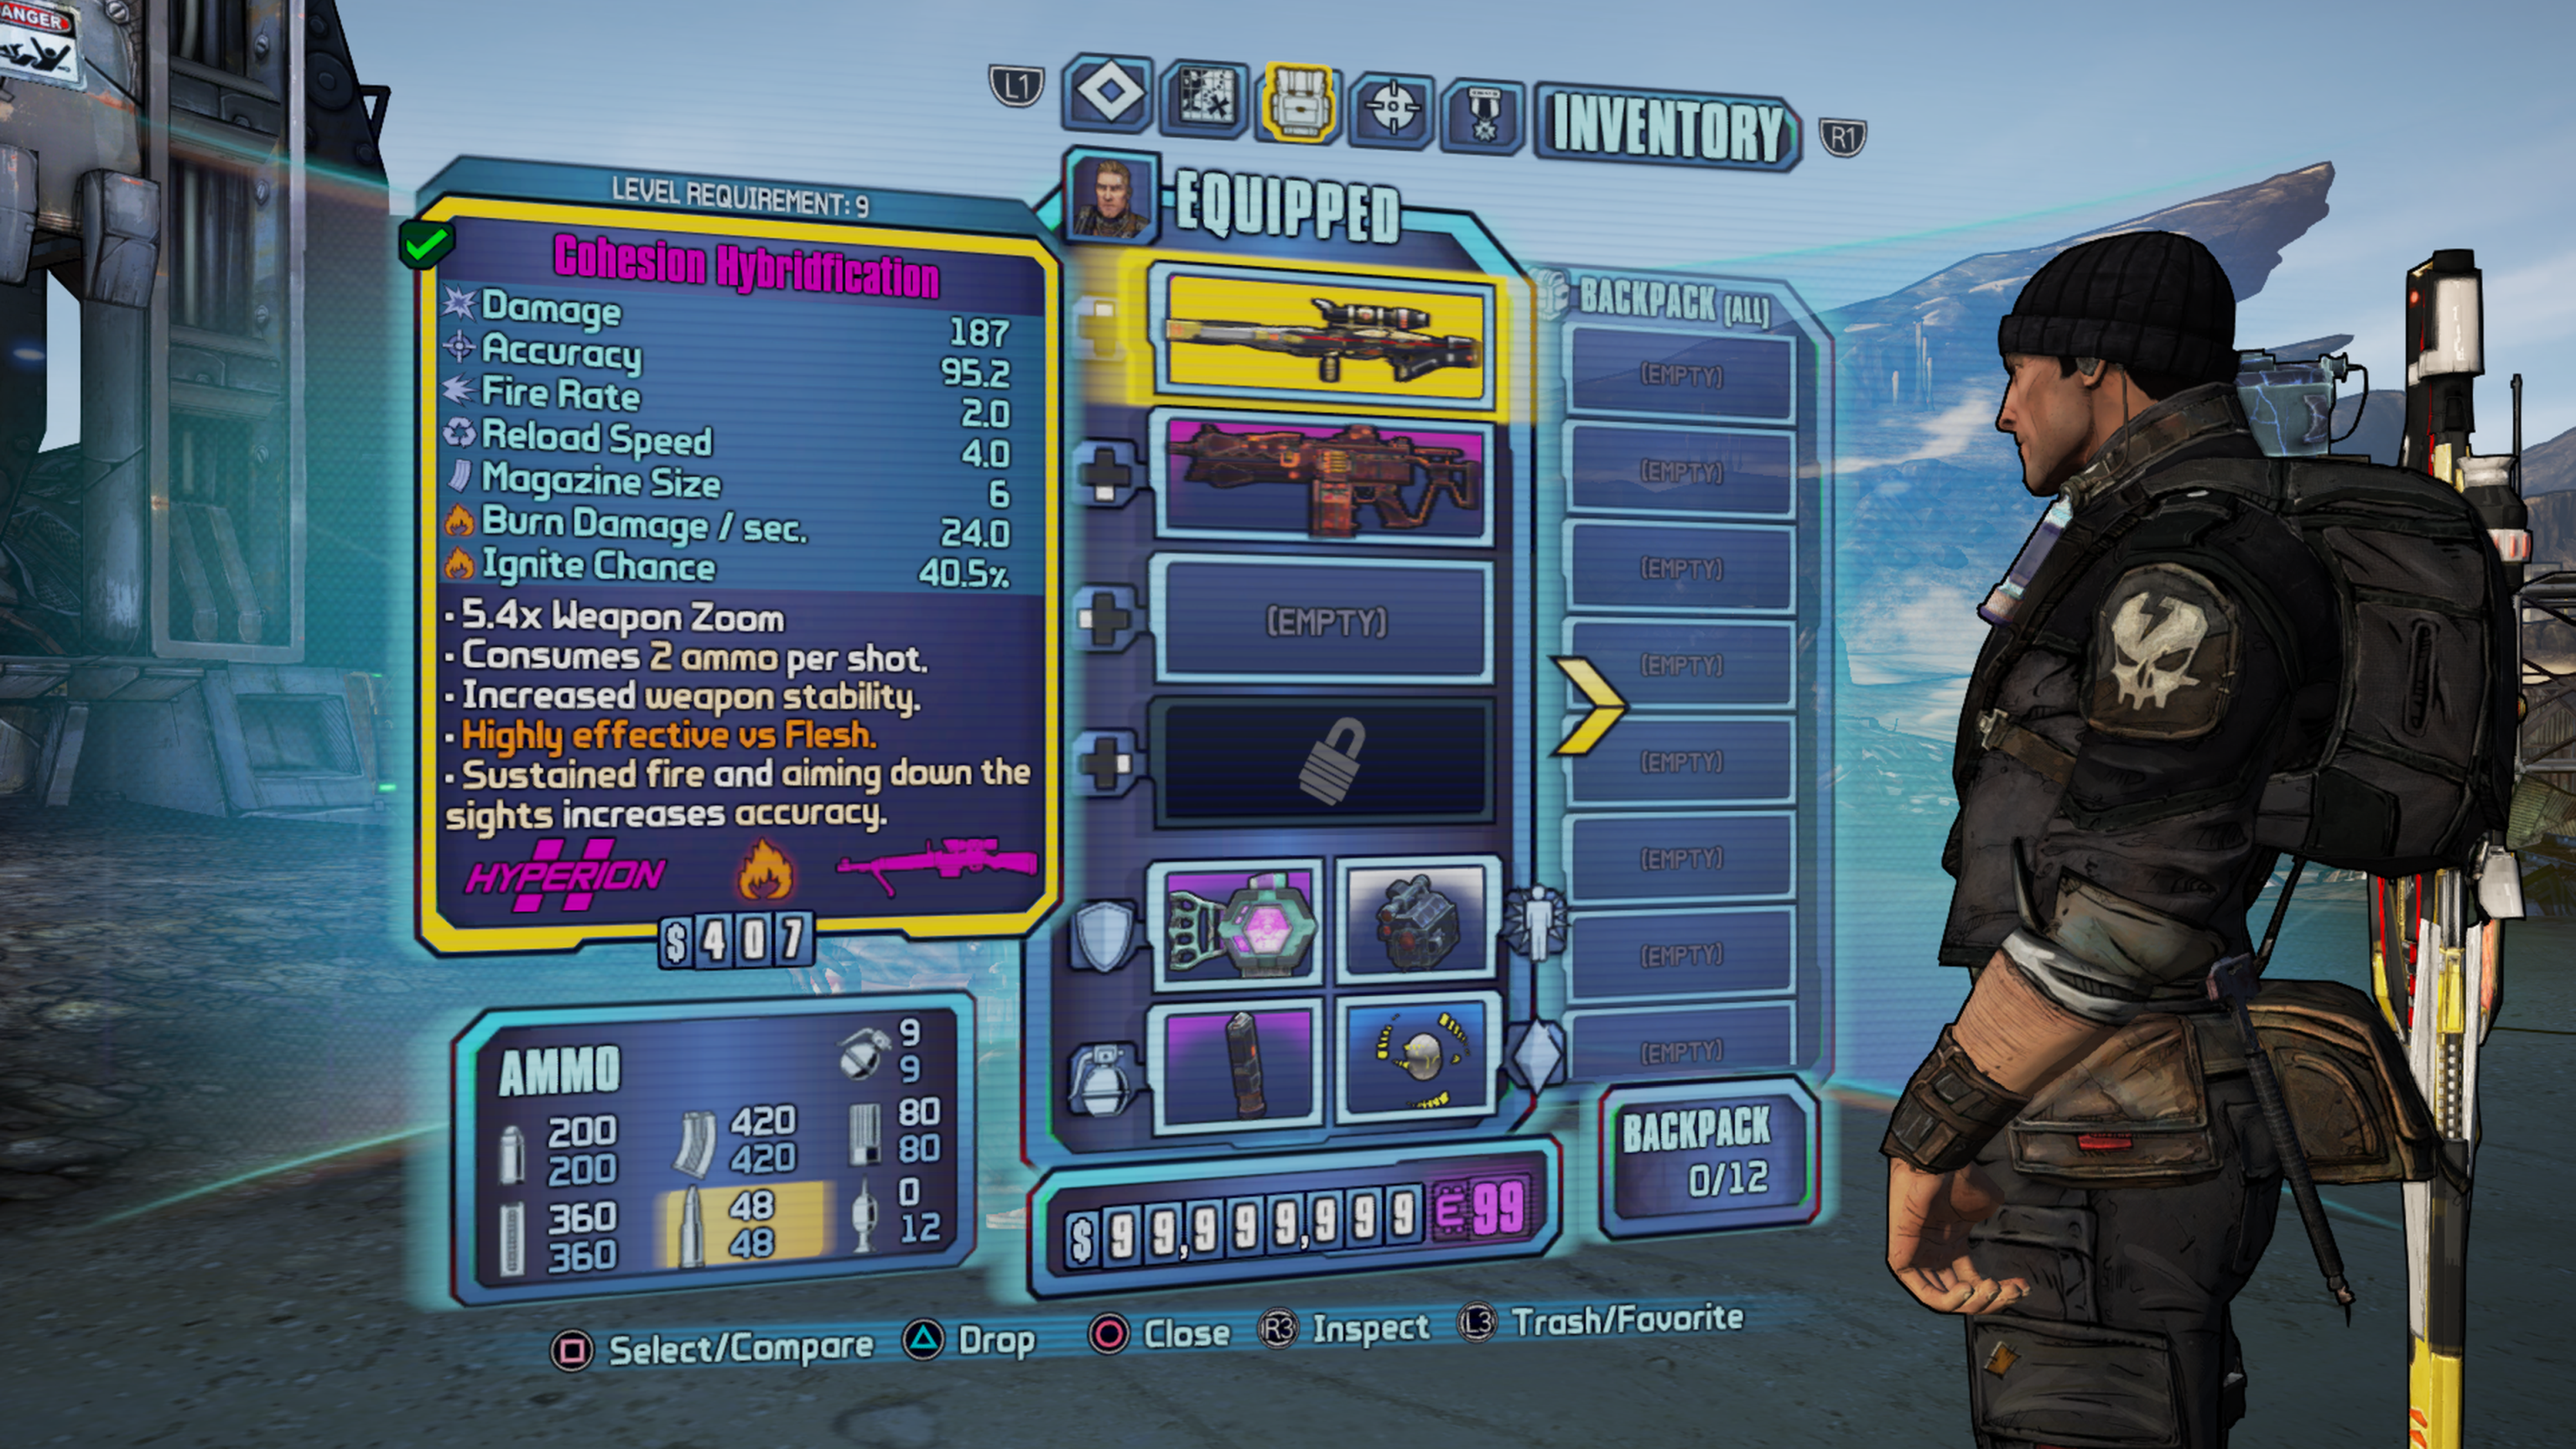 Ps4 wizard. Borderlands 2 save PLAYSTATION. Lady Hammerlock. Save Wizard Поддерживаемые игры. Save Wizard for ps4 Max.